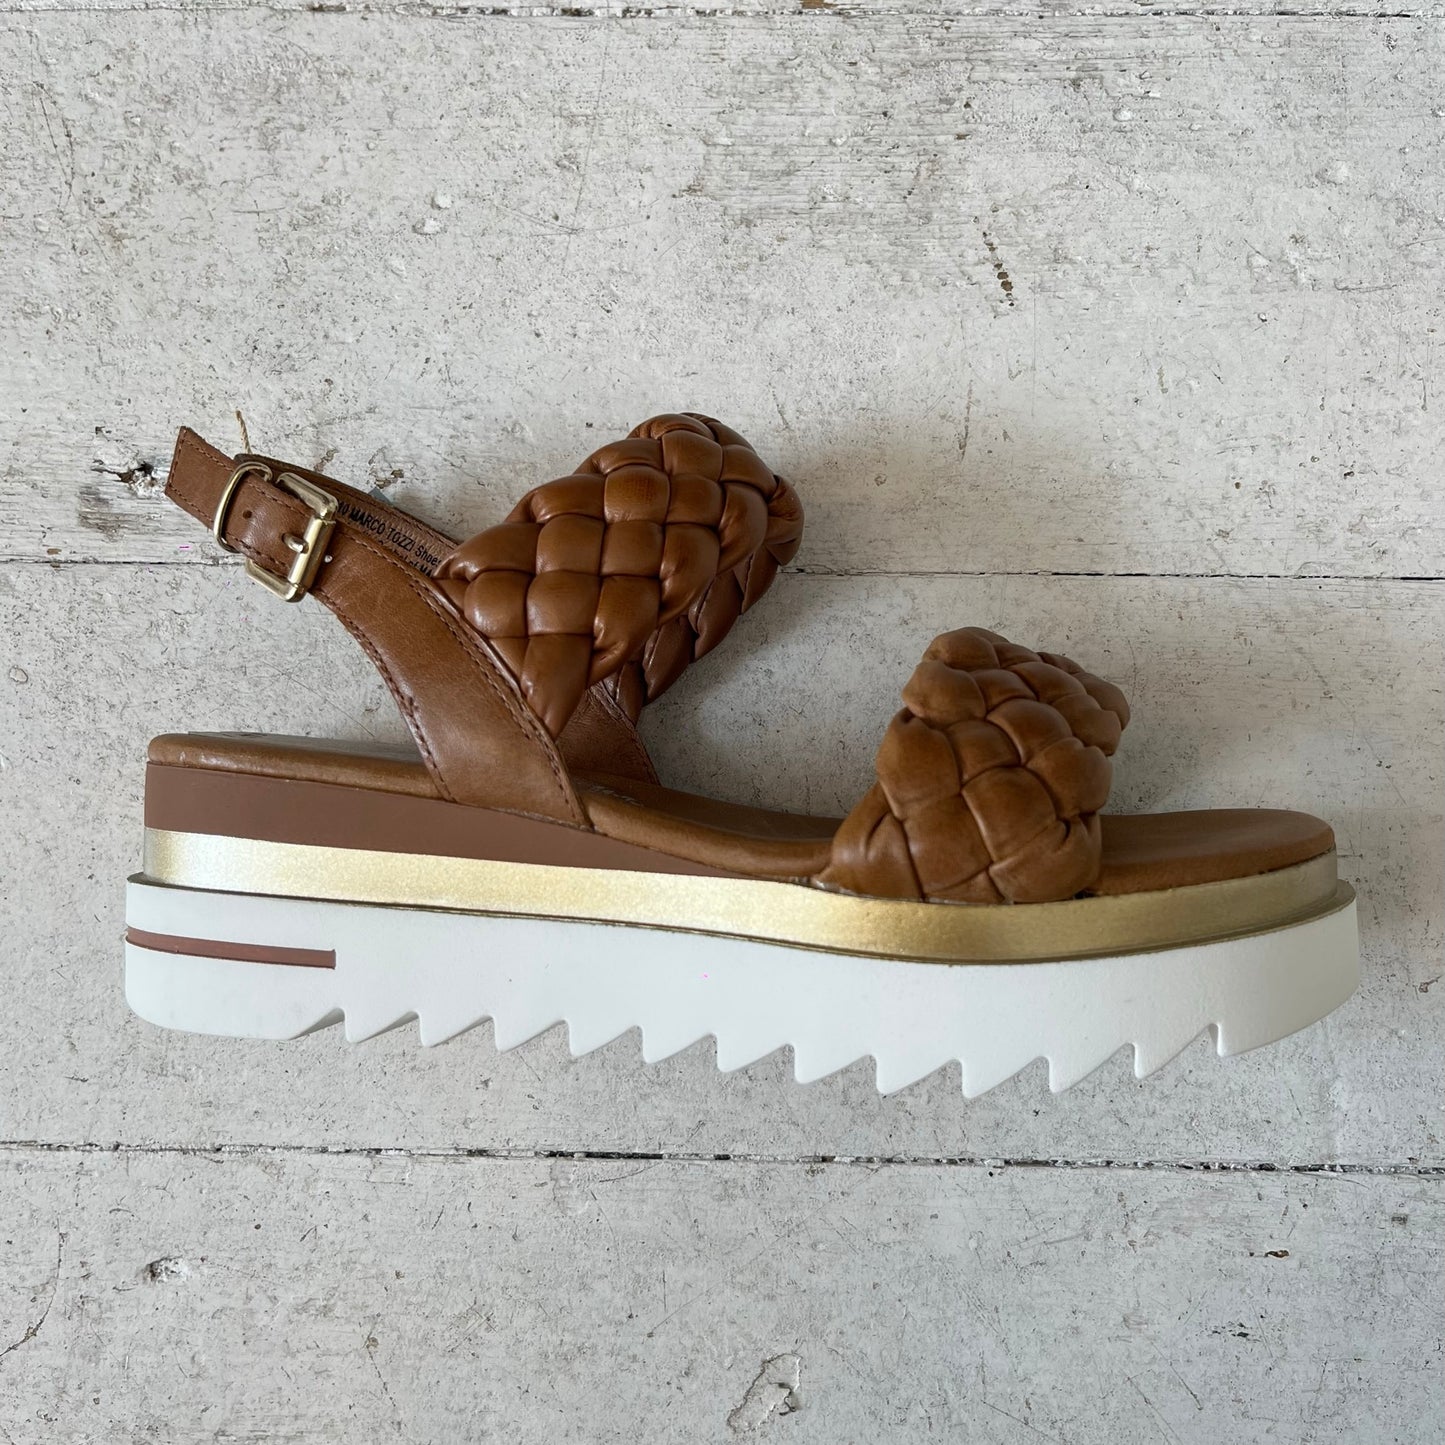 Marco Tozzi Pleated Sandals